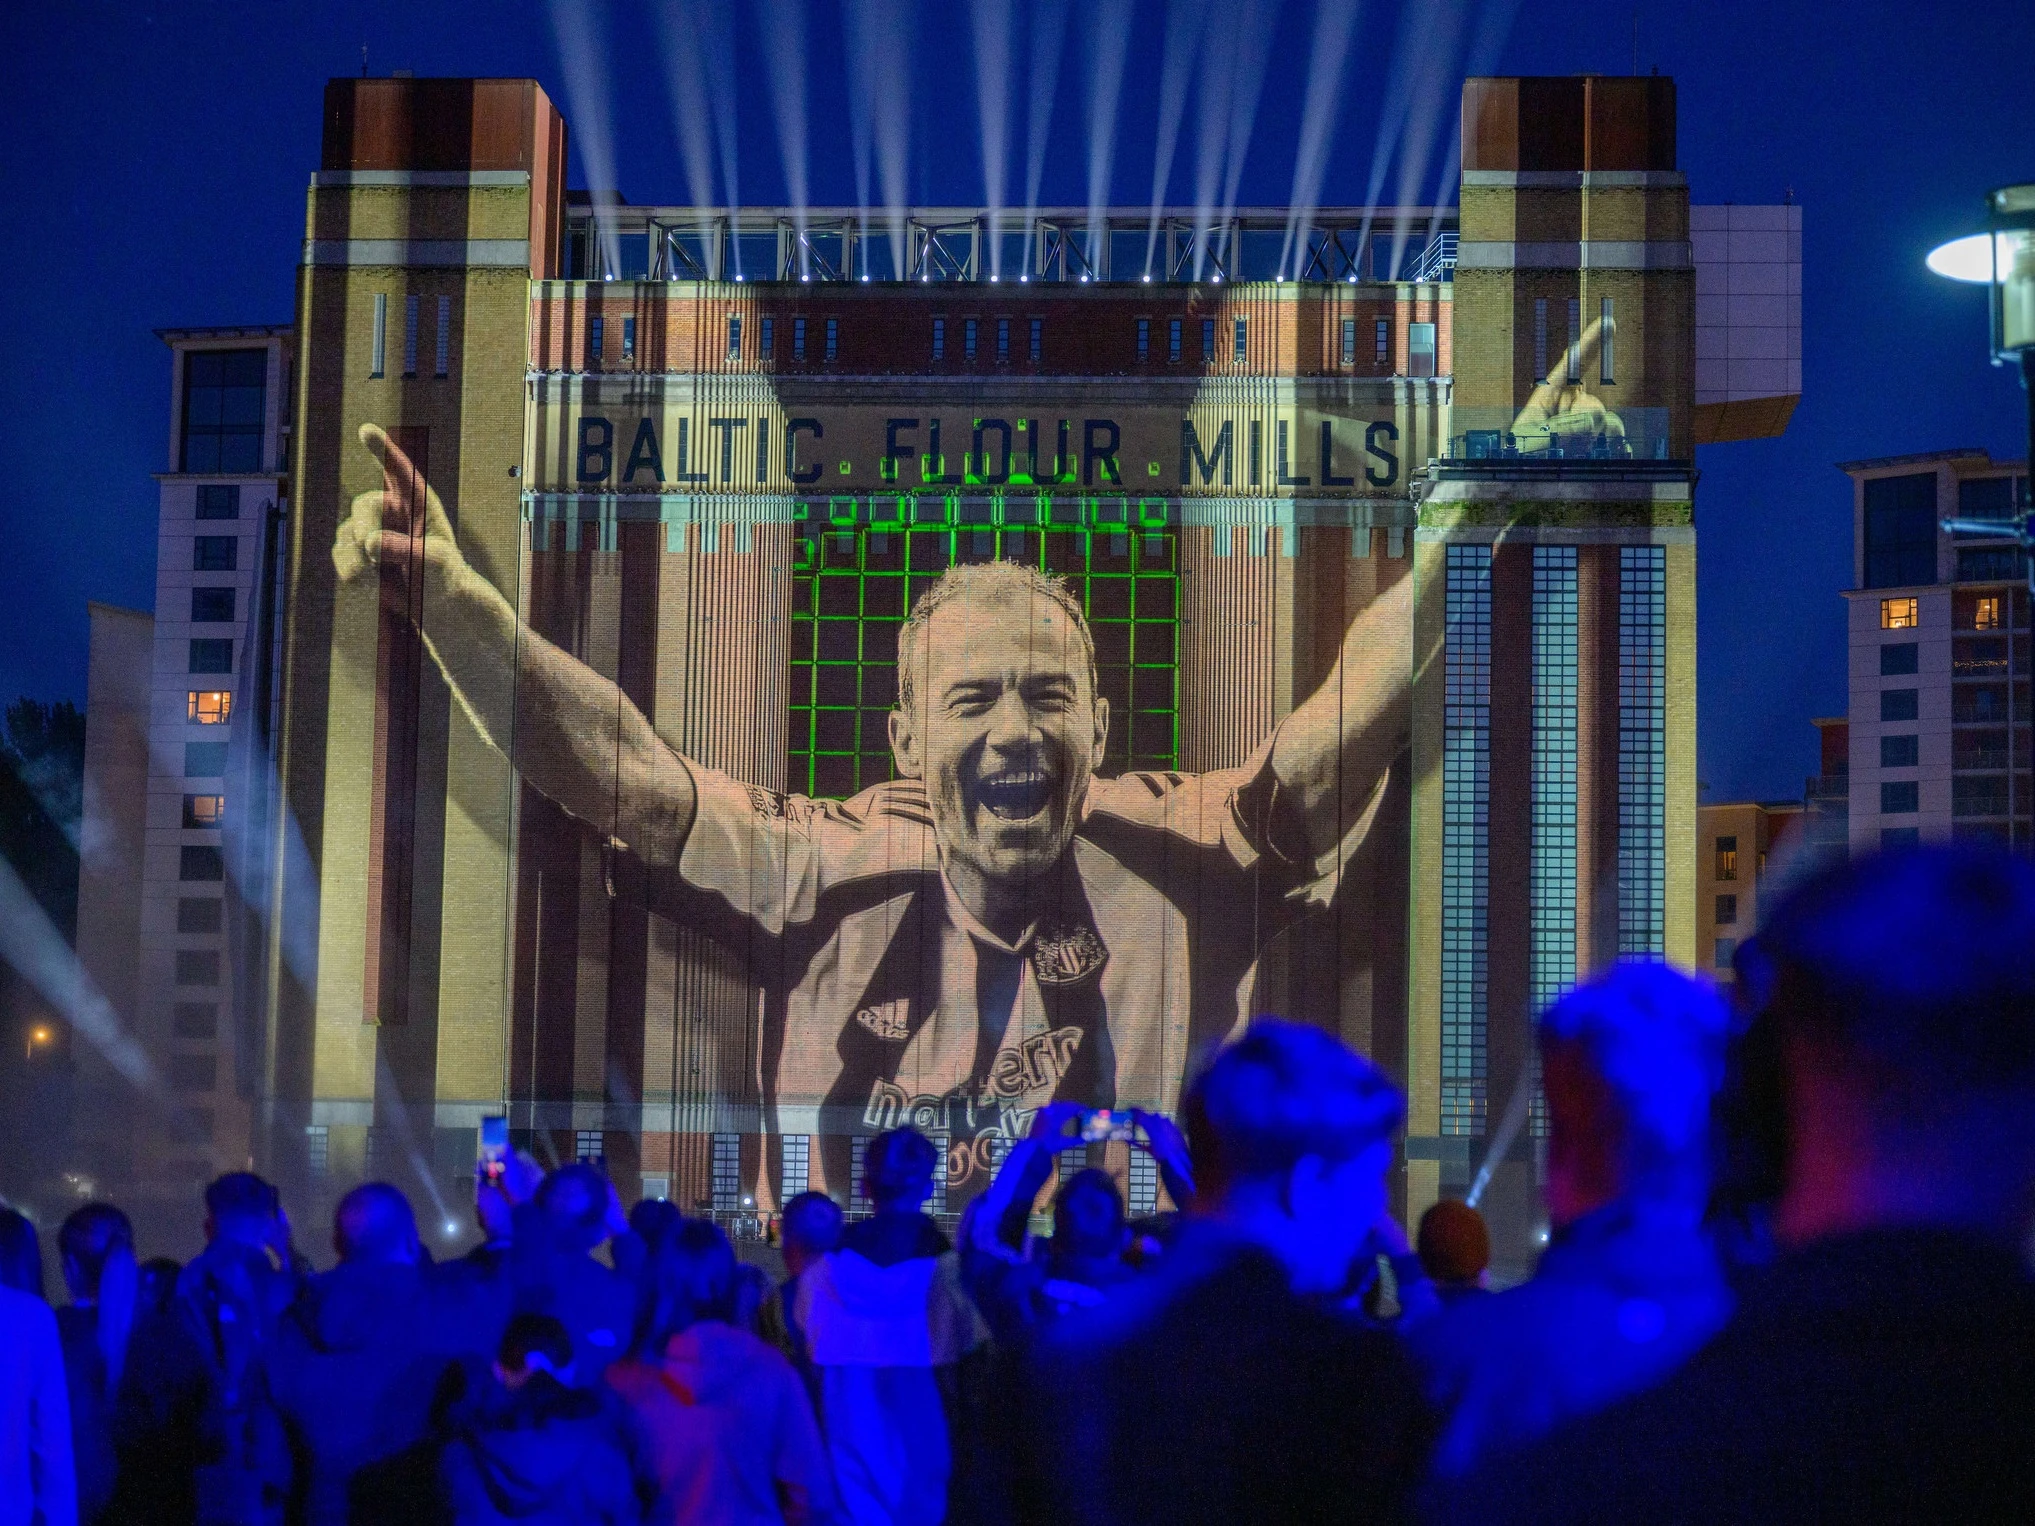 An image of Alan Shearer is projected onto the Baltic Flour Mill